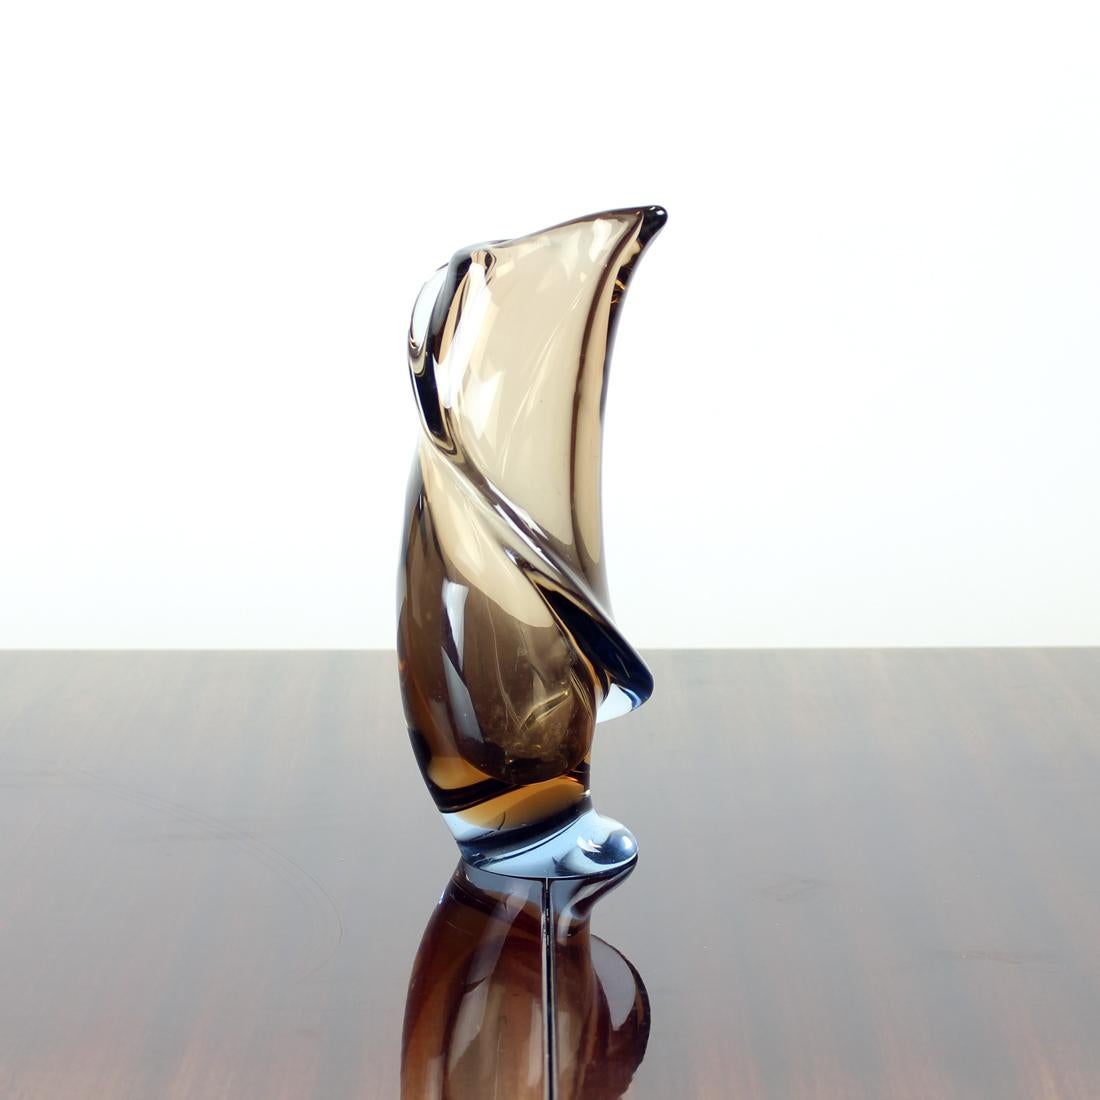 This is a unique statement piece. The glass vase made of hand moulded art glass. Produced in Czechoslovakia in 1960s by Emanuel Beranek for Skrdlovice Glass Union factory. The glass making tradition was extraordinary in Czechoslovakia in the 60s.